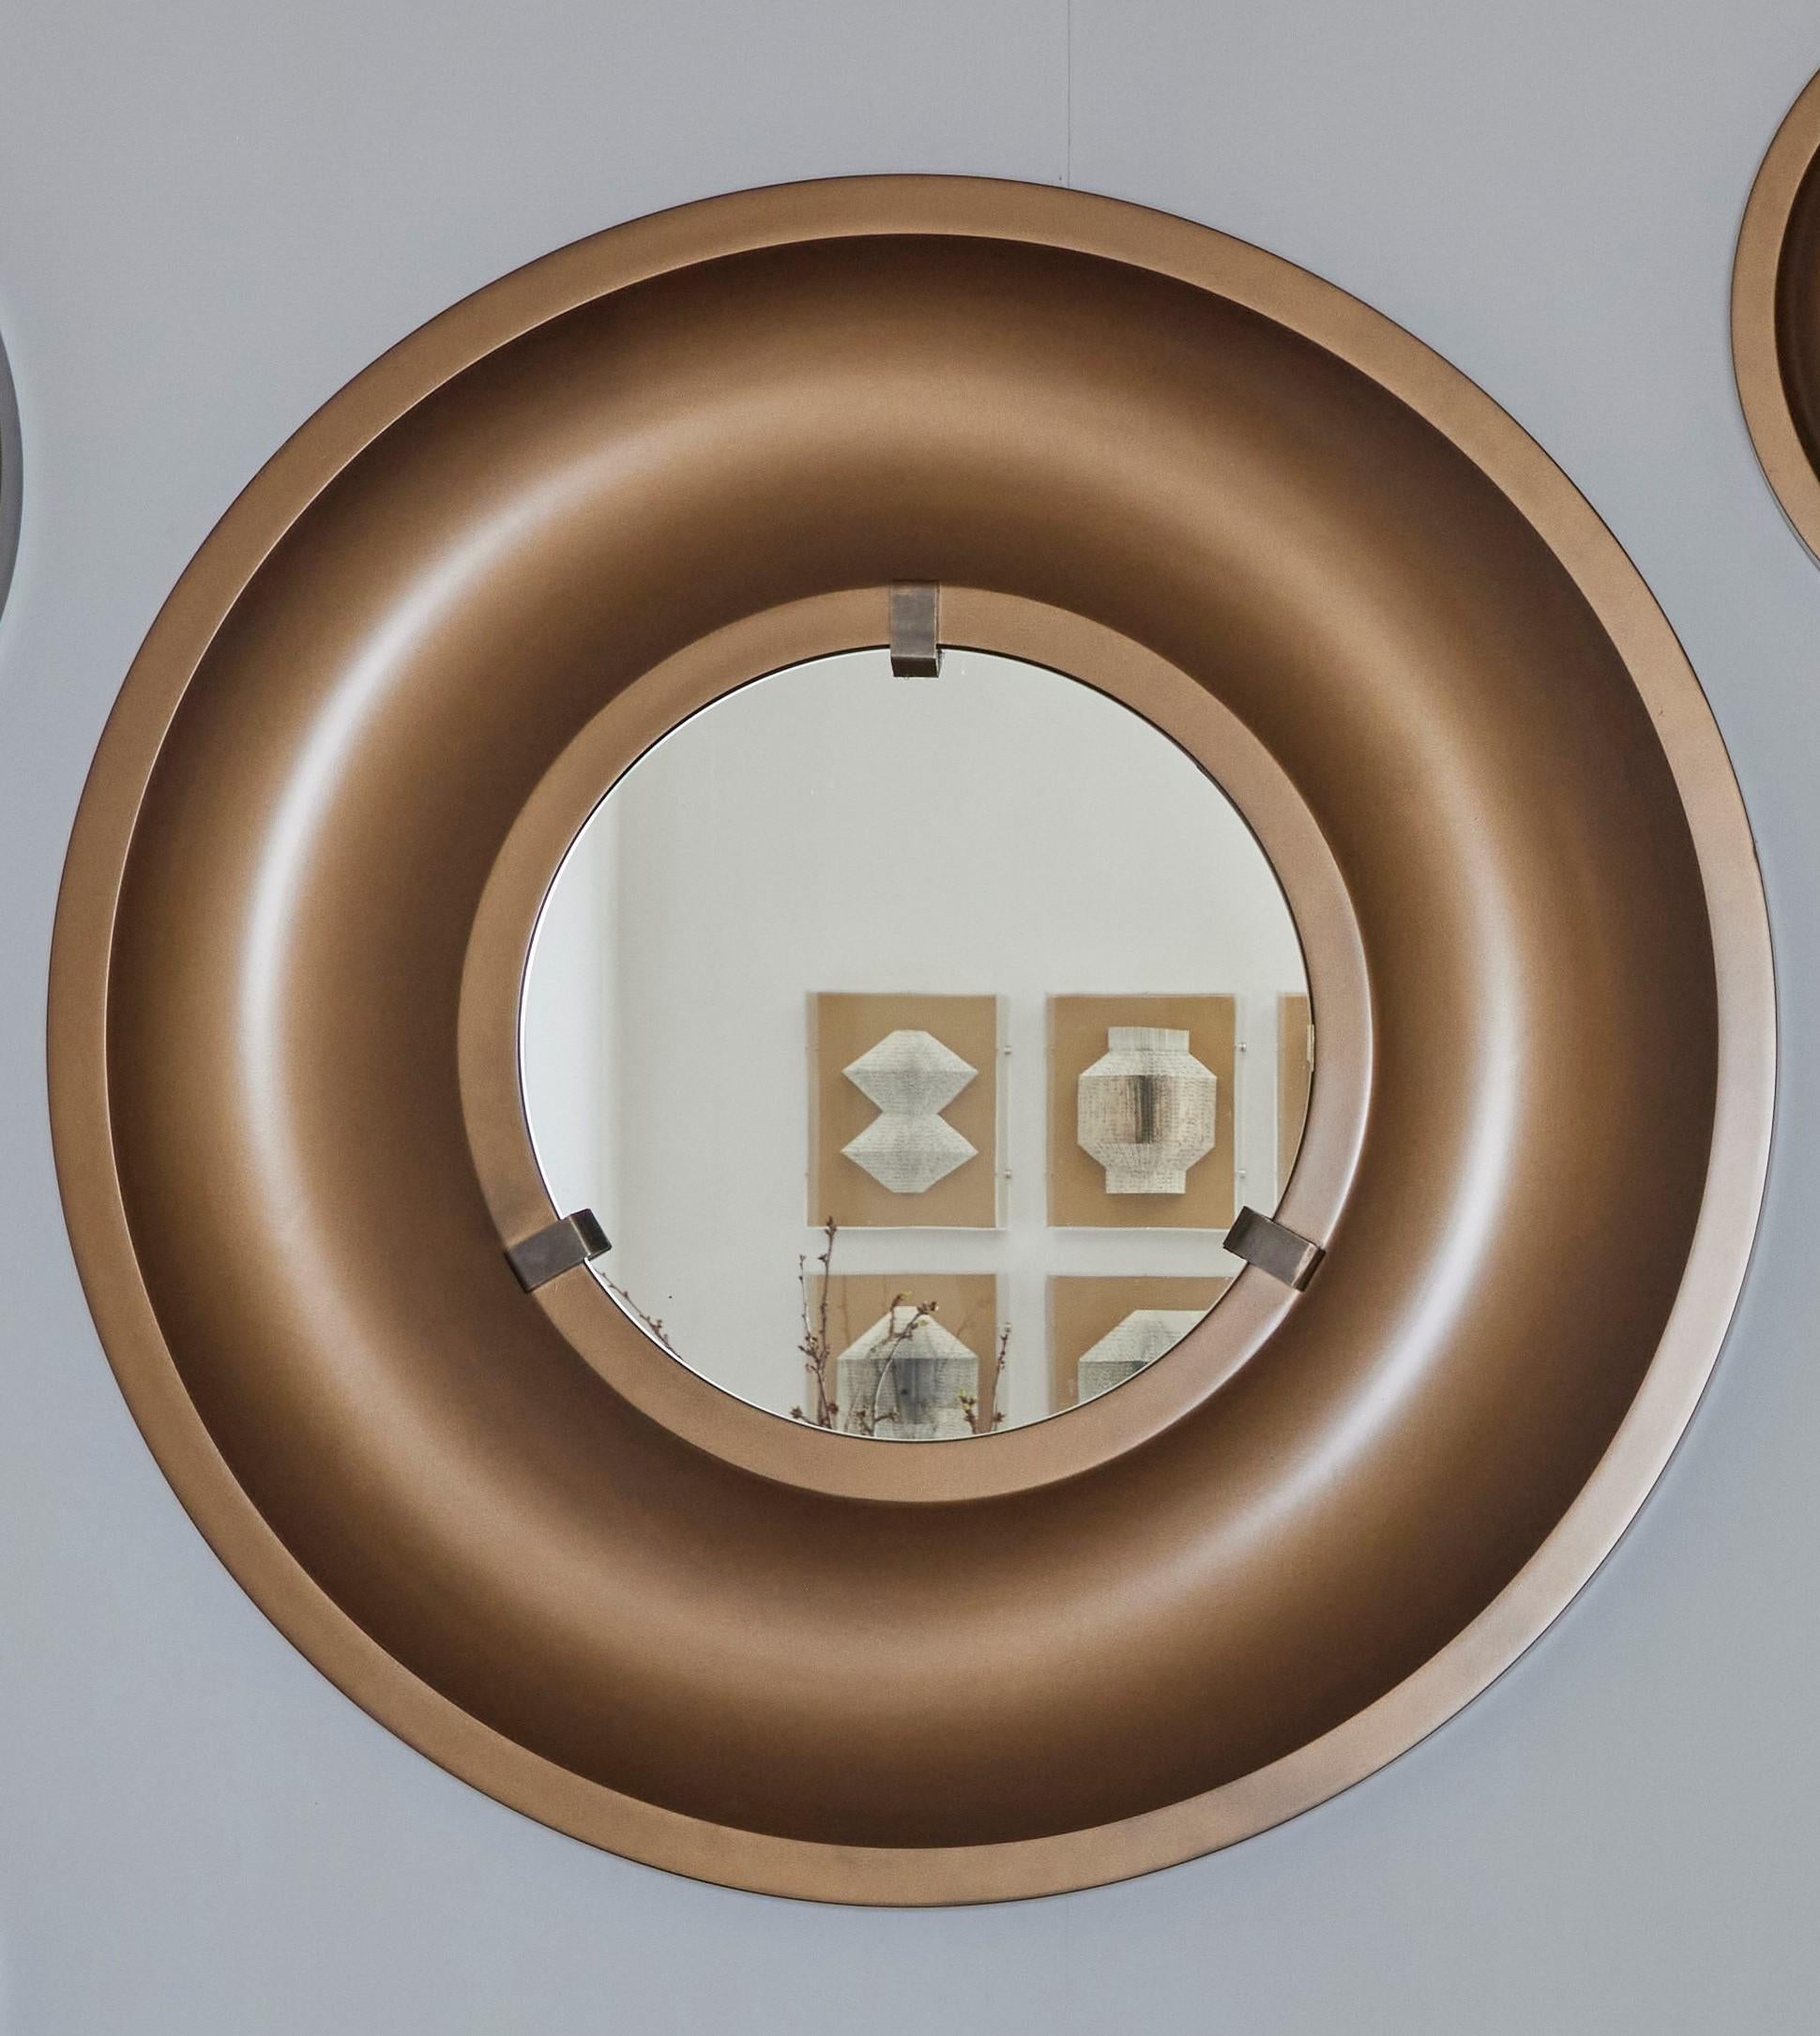 Our BULLSEYE MIRRORS do more than just reflect—they interpret. Each is cast in a rich bronze hue, differing in Size, and thus offers a distinct perspective. The mirrors sit within sleek wooden frames, a choice that pays homage to organic beauty